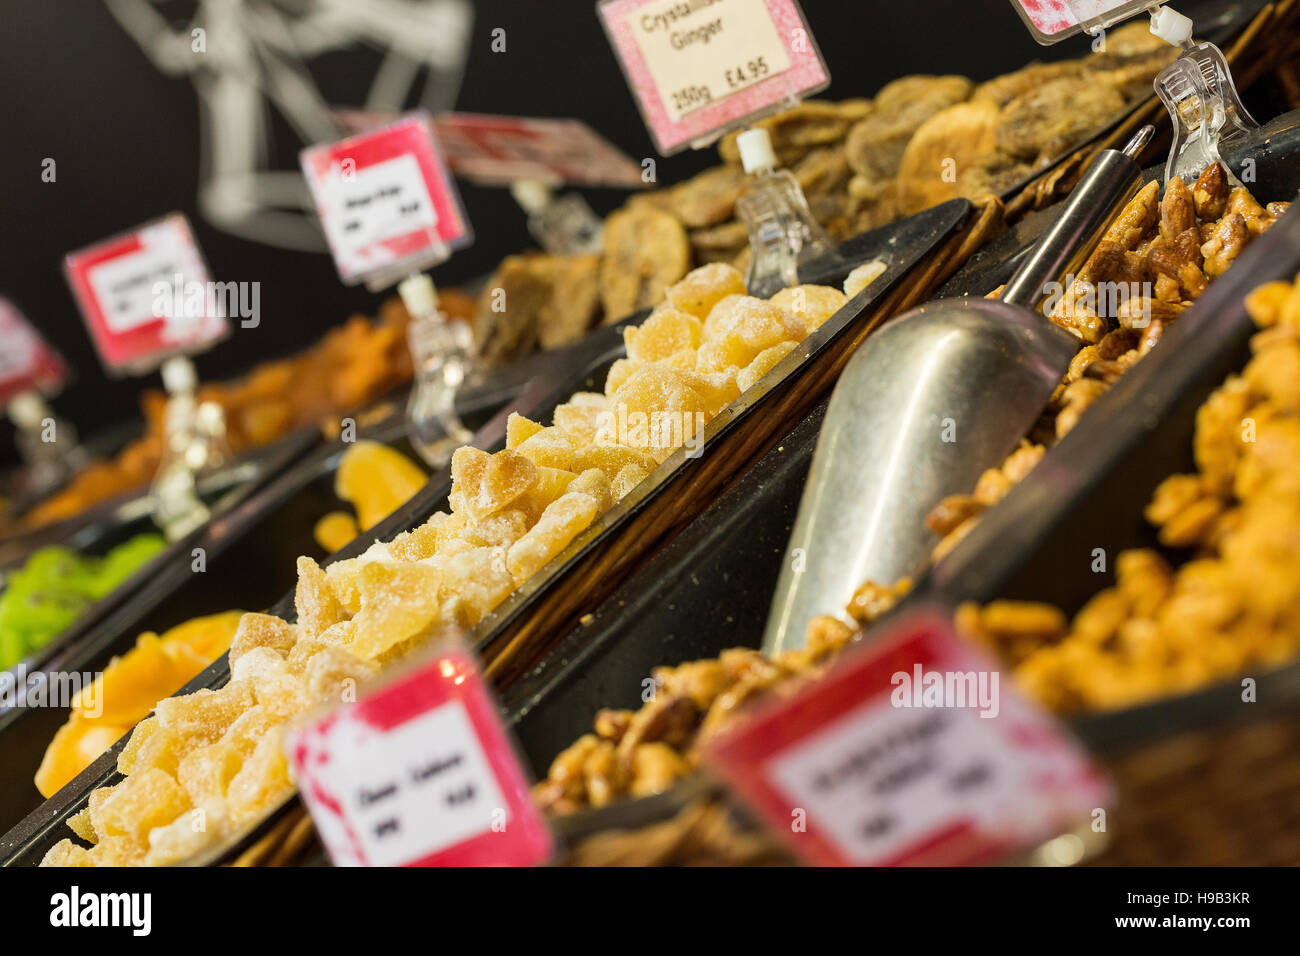 Range of natural food on sale at farmers market stall Stock Photo